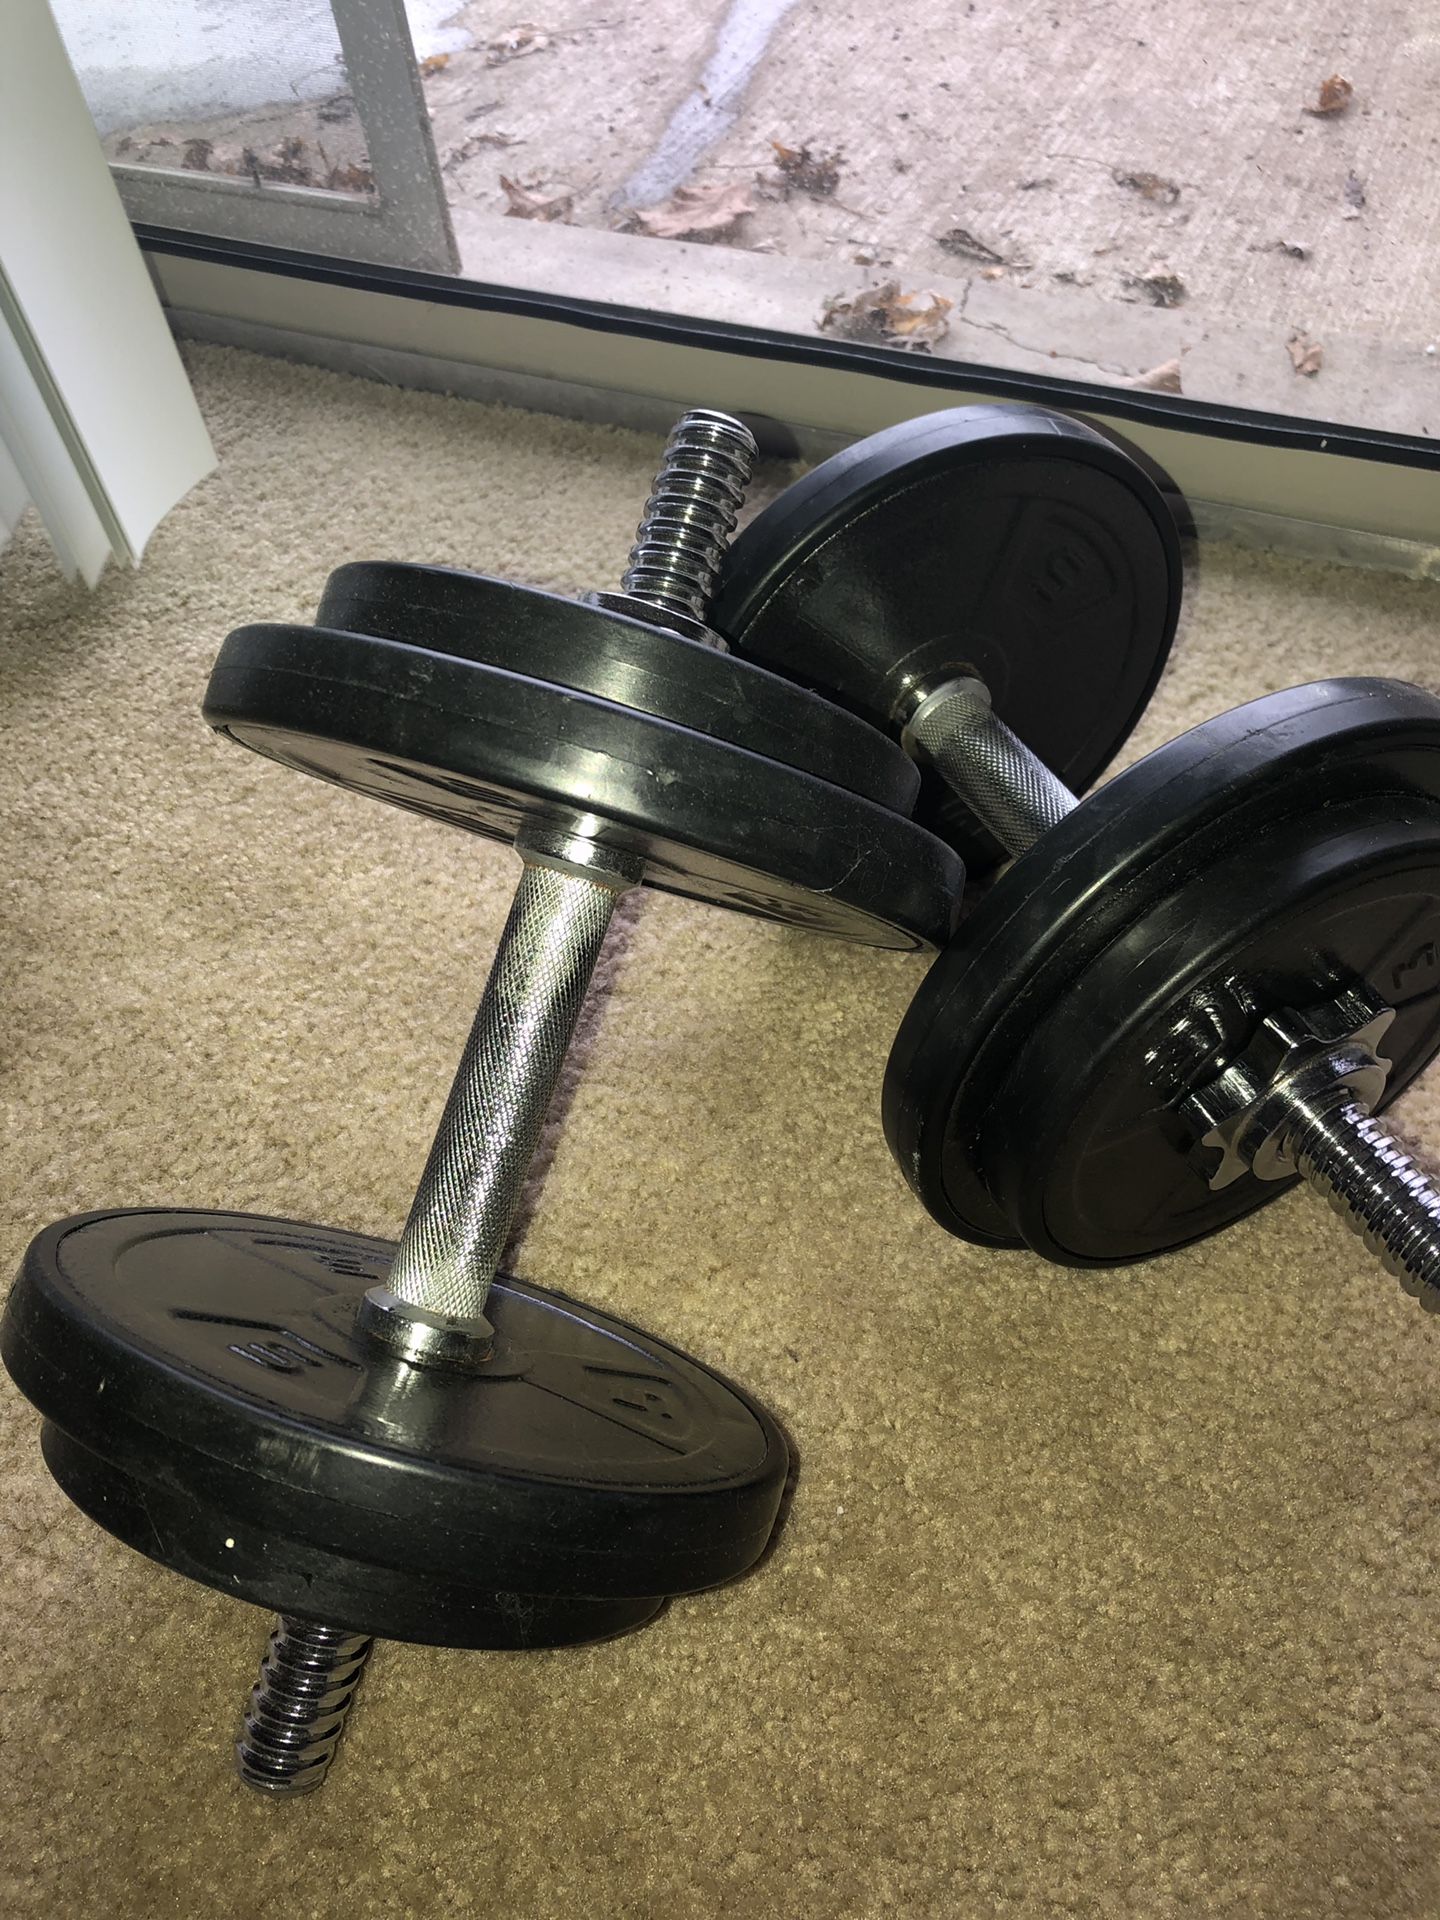 DUMBBELL . Weight is 16 pounds each .